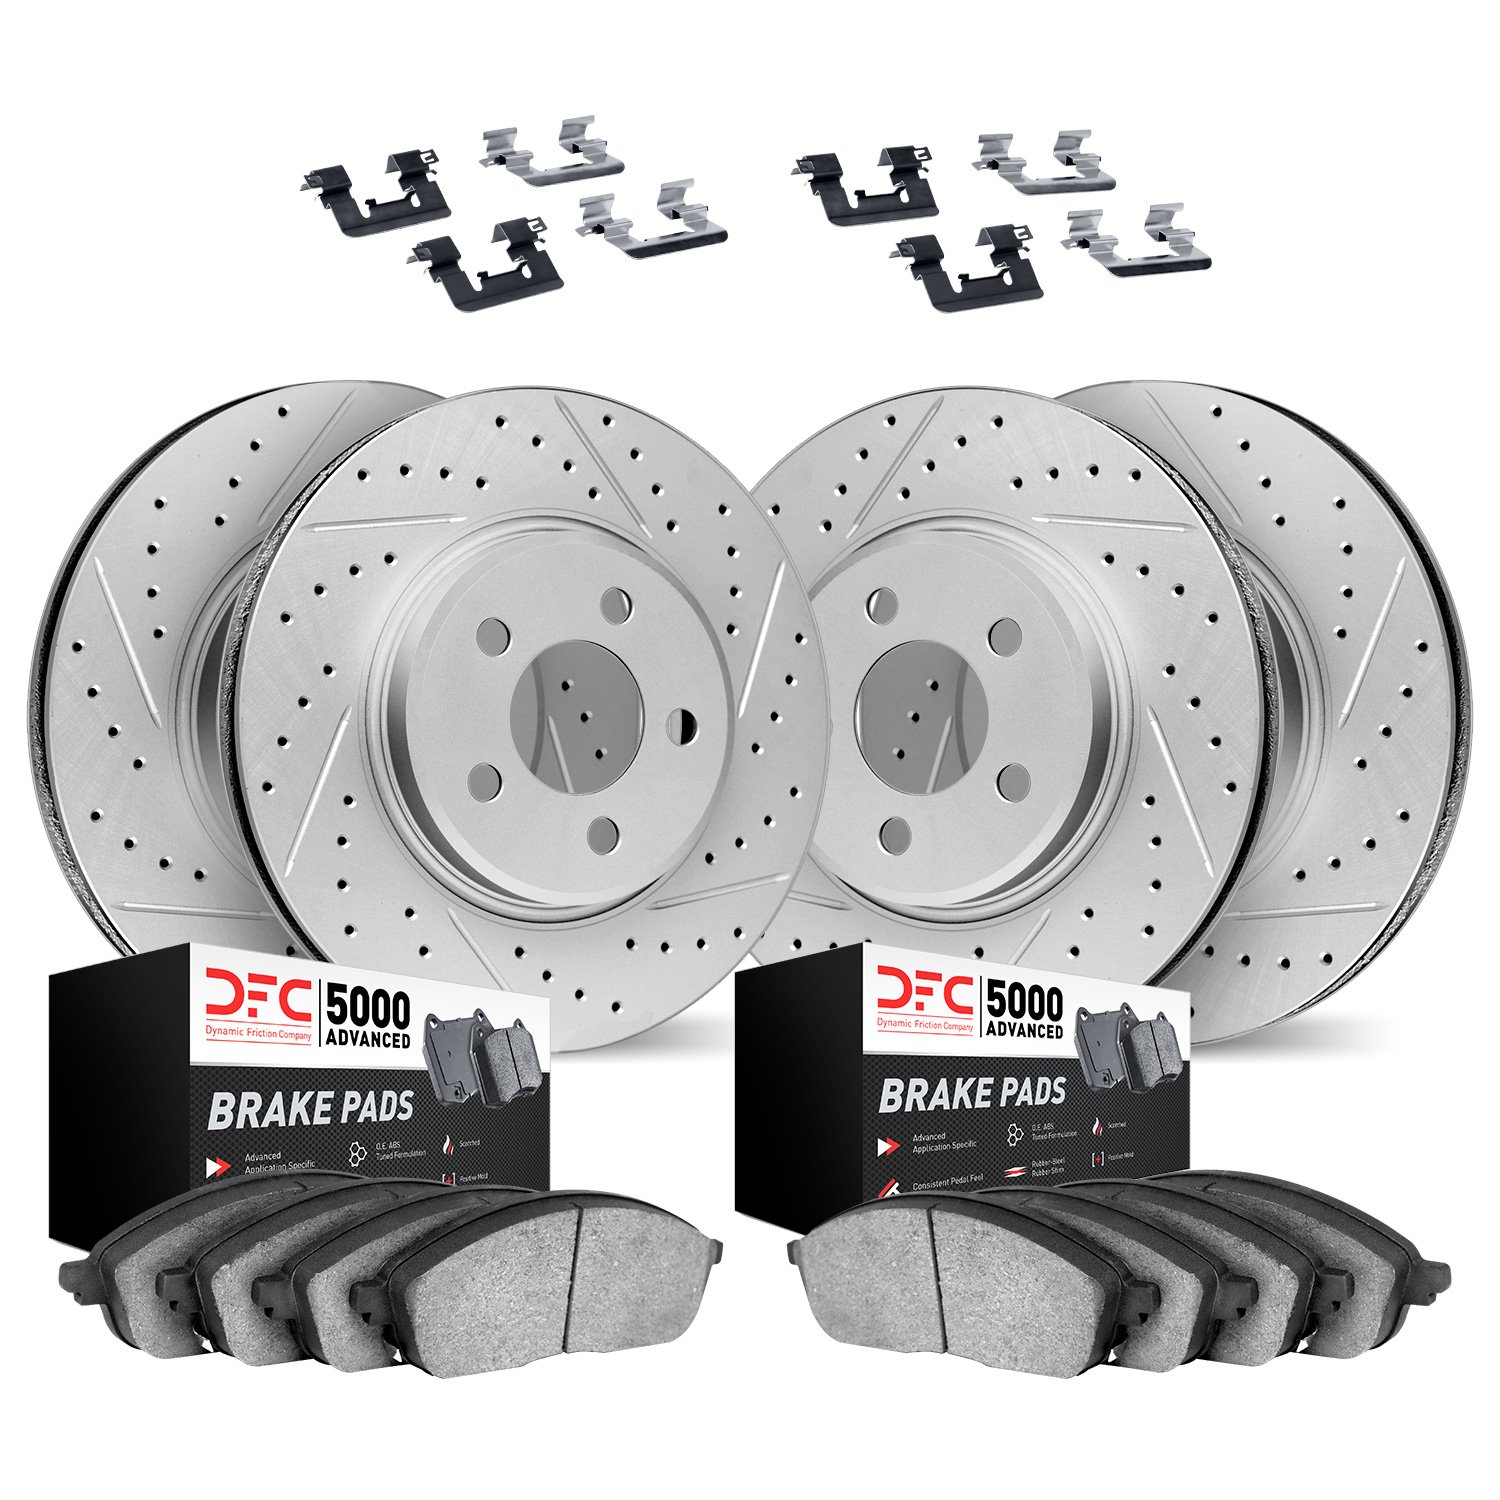 2514-31045 Geoperformance Drilled/Slotted Rotors w/5000 Advanced Brake Pads Kit & Hardware, 2007-2013 BMW, Position: Front and R